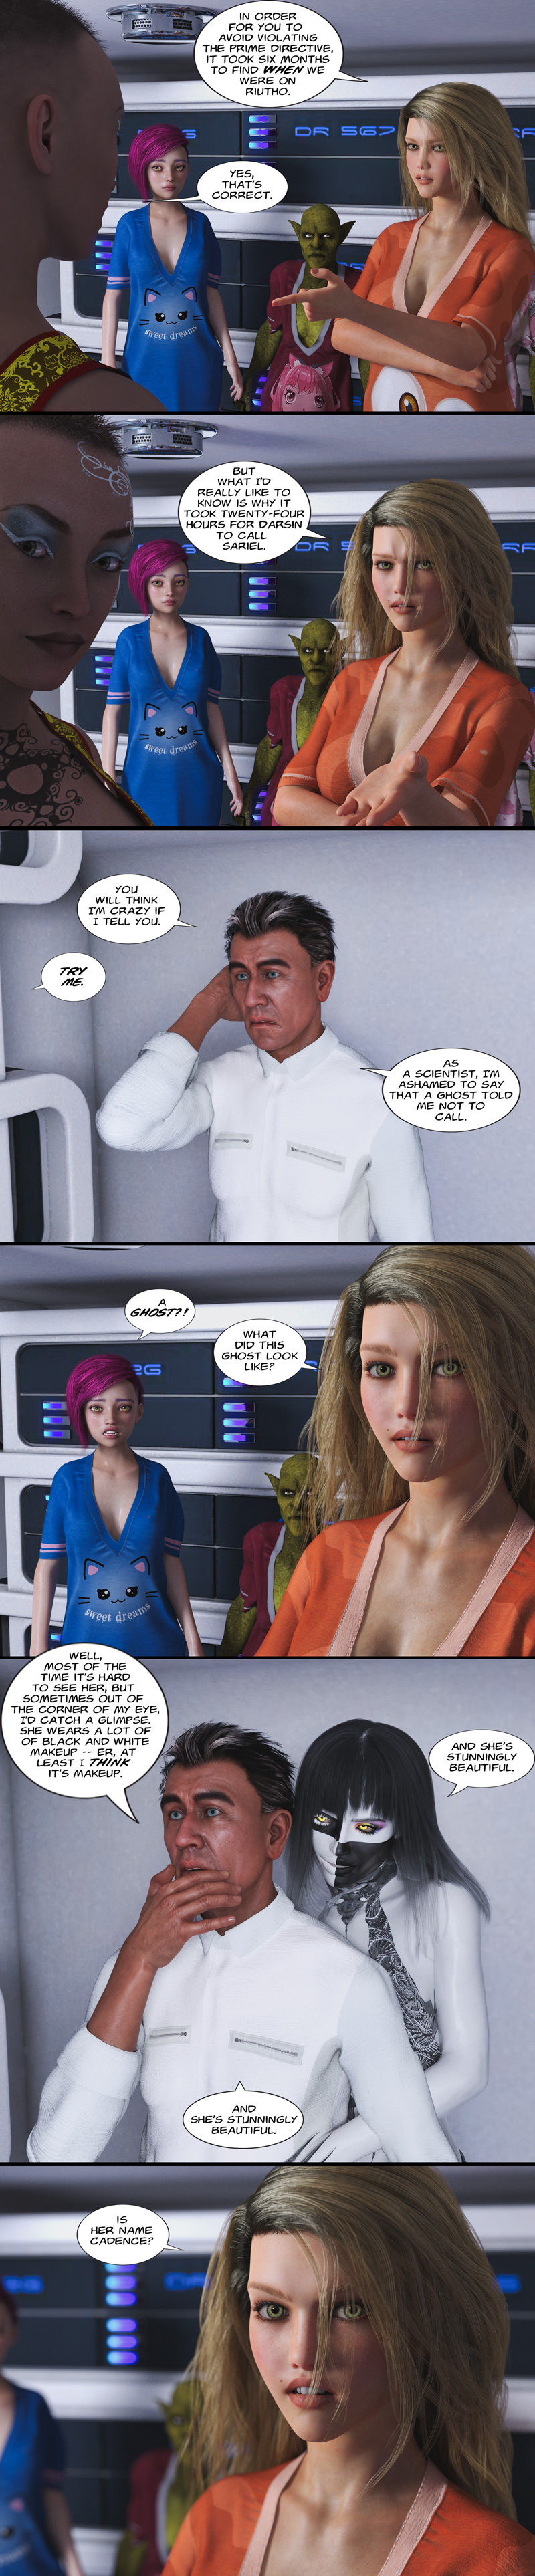 Chapter 21, page 28 – was her name Cadence?